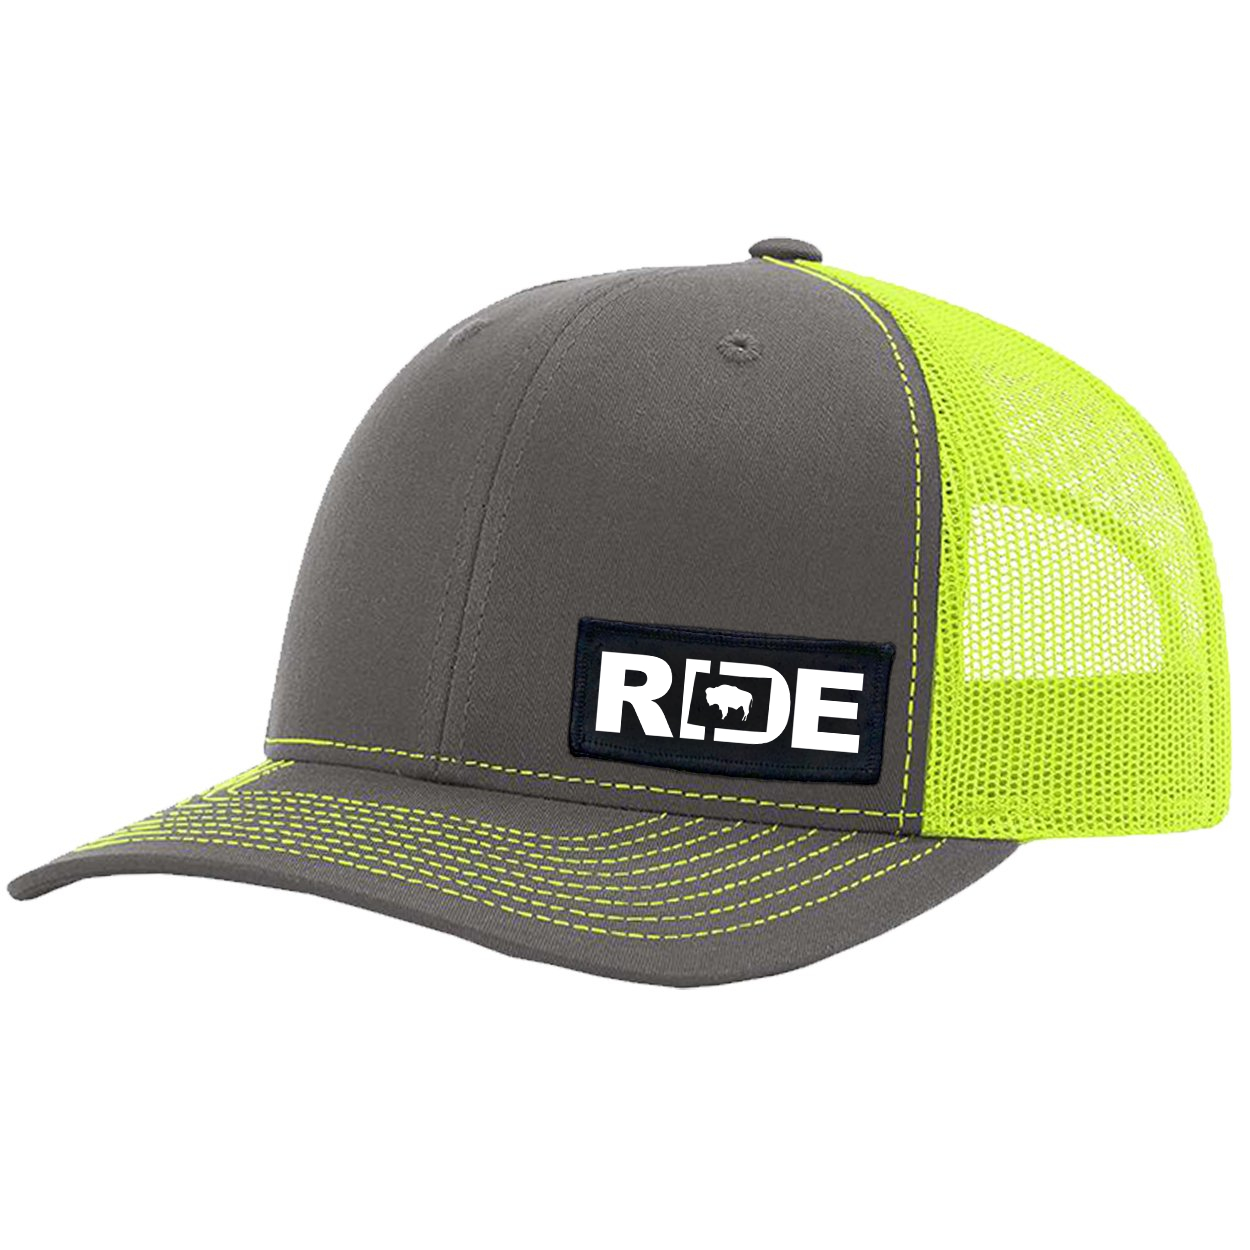 Ride Wyoming Night Out Woven Patch Snapback Trucker Hat Charcoal/Neon Yellow (White Logo)